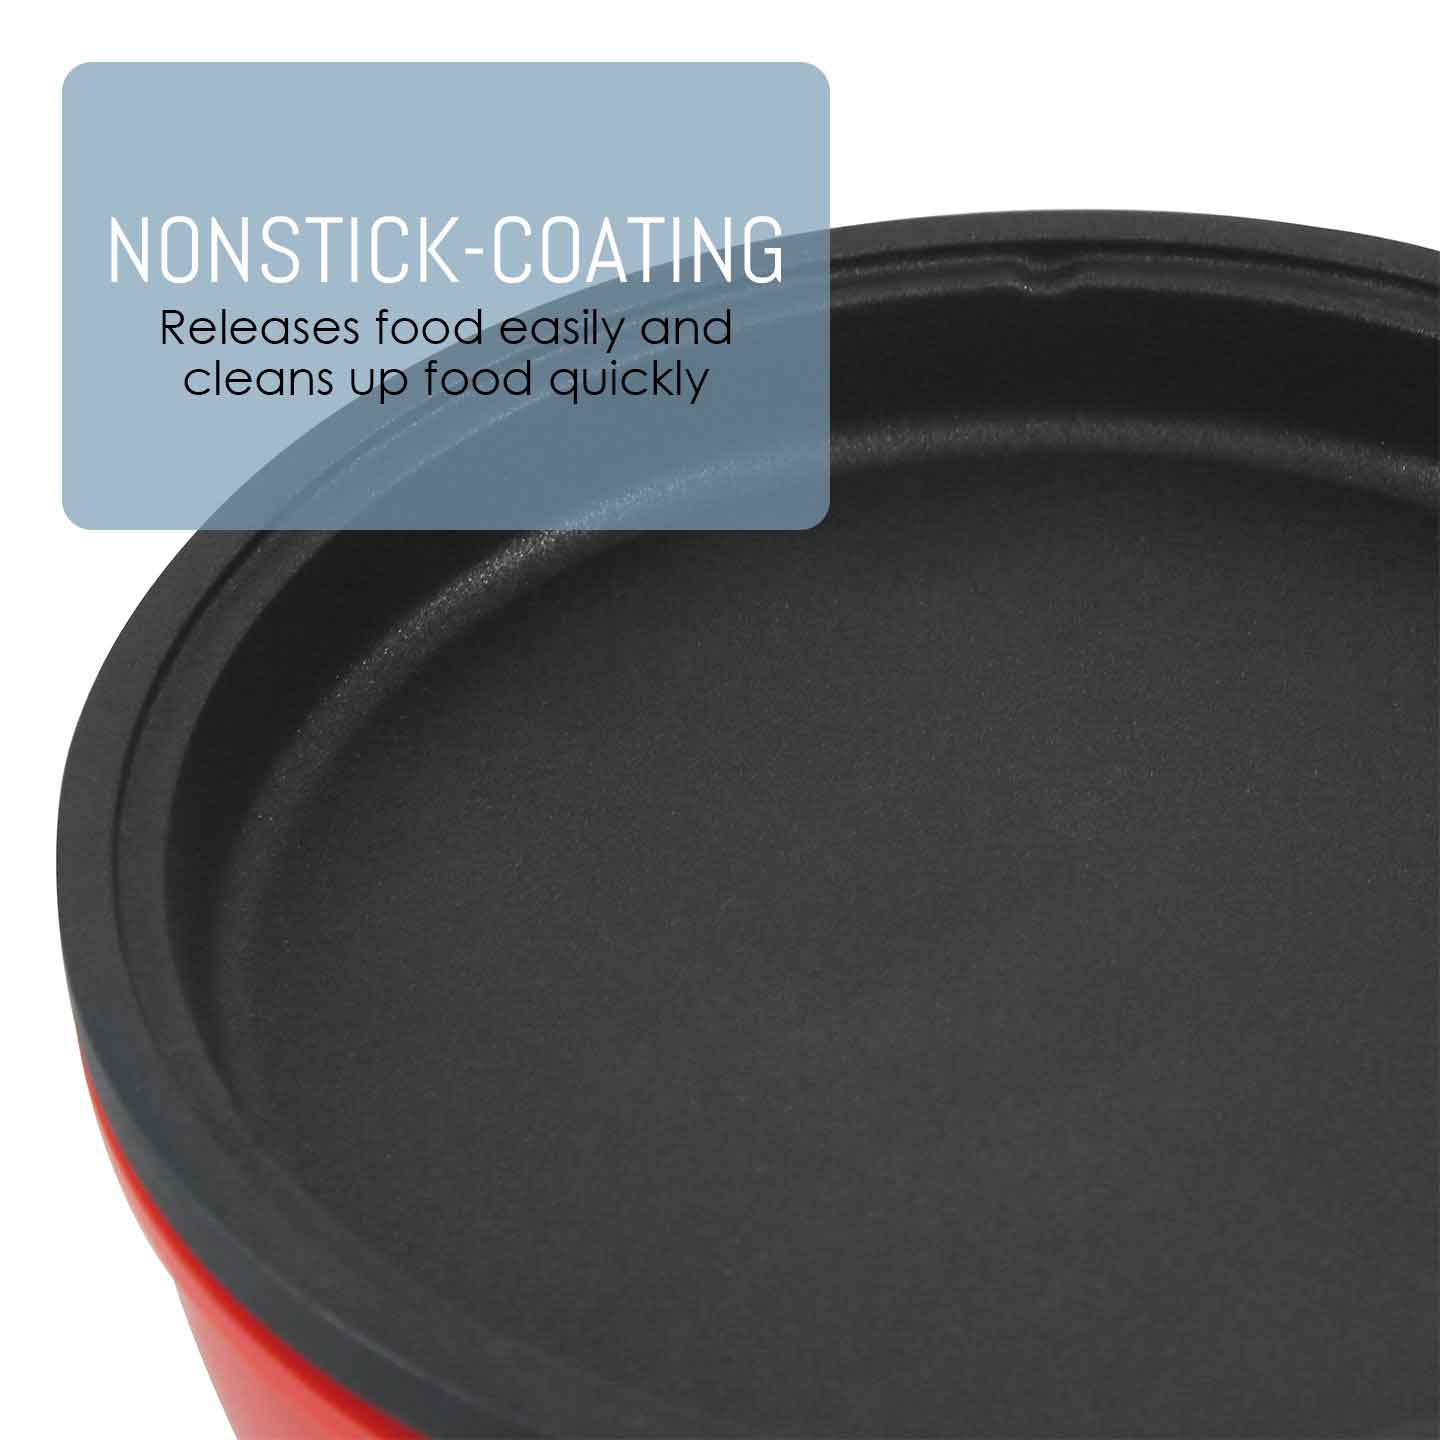 Elite Cuisine 12X12 Non-Stick Electric Skillet with Glass Lid - Black NEW